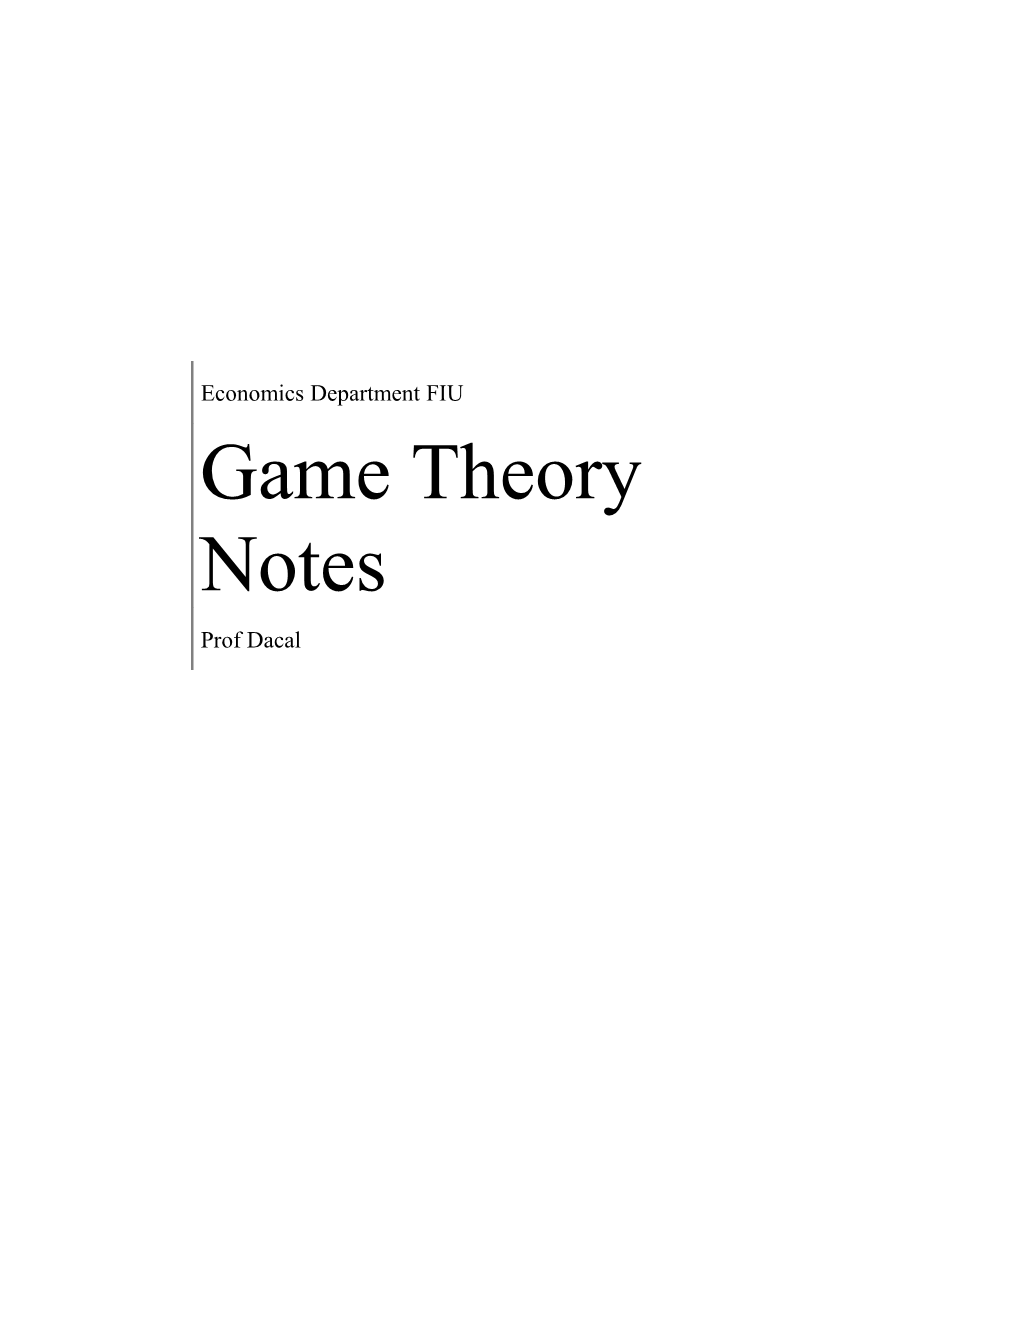 Game Theory Notes